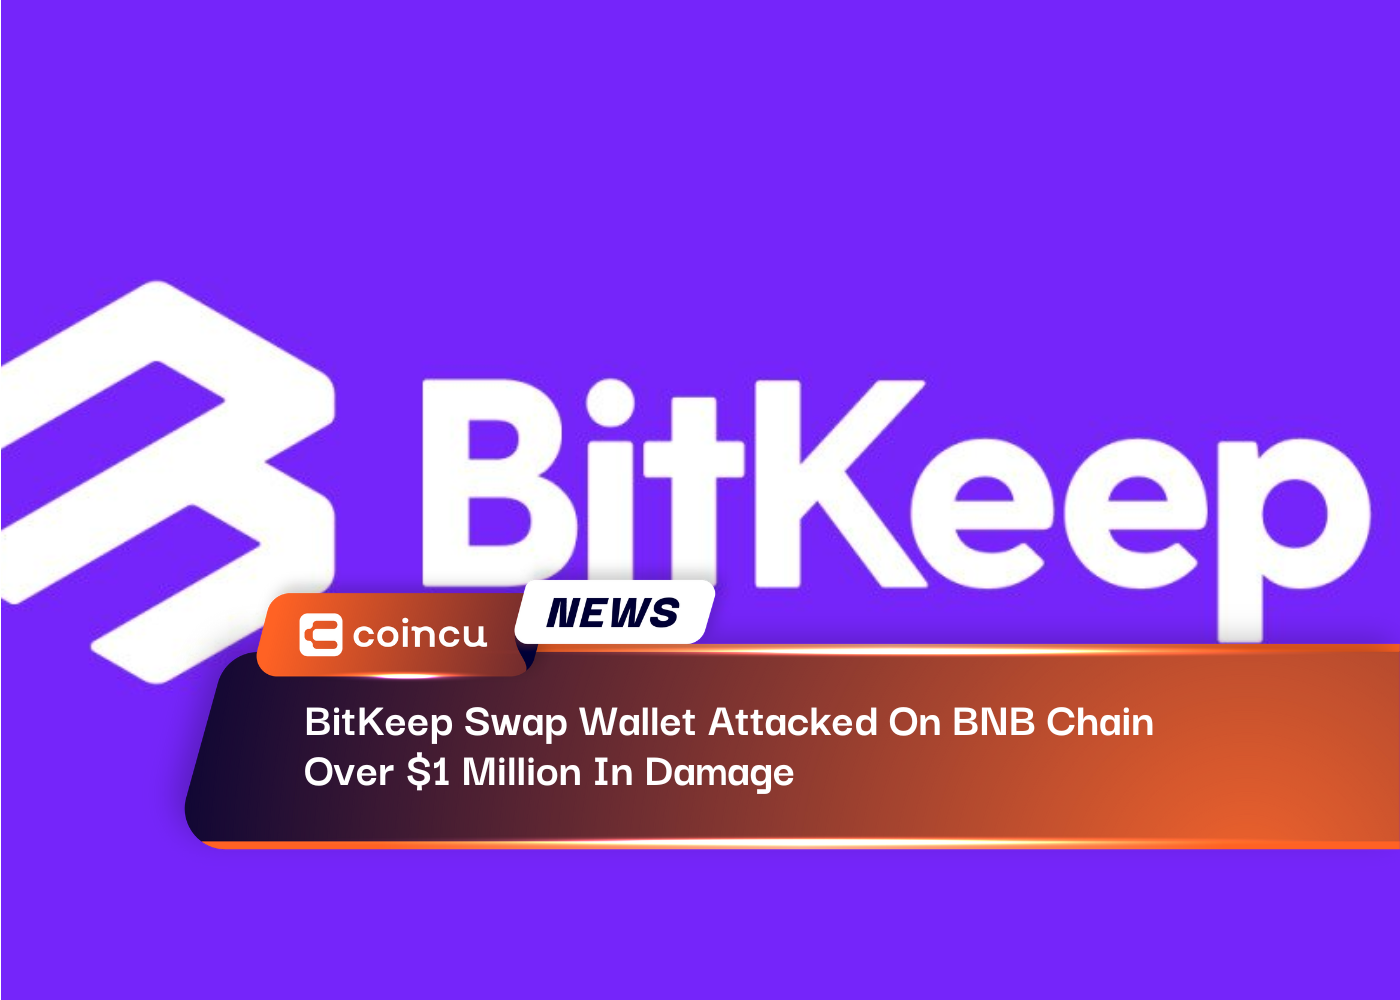 BitKeep Swap Wallet Attacked On BNB Chain, Over $1 Million In Damage